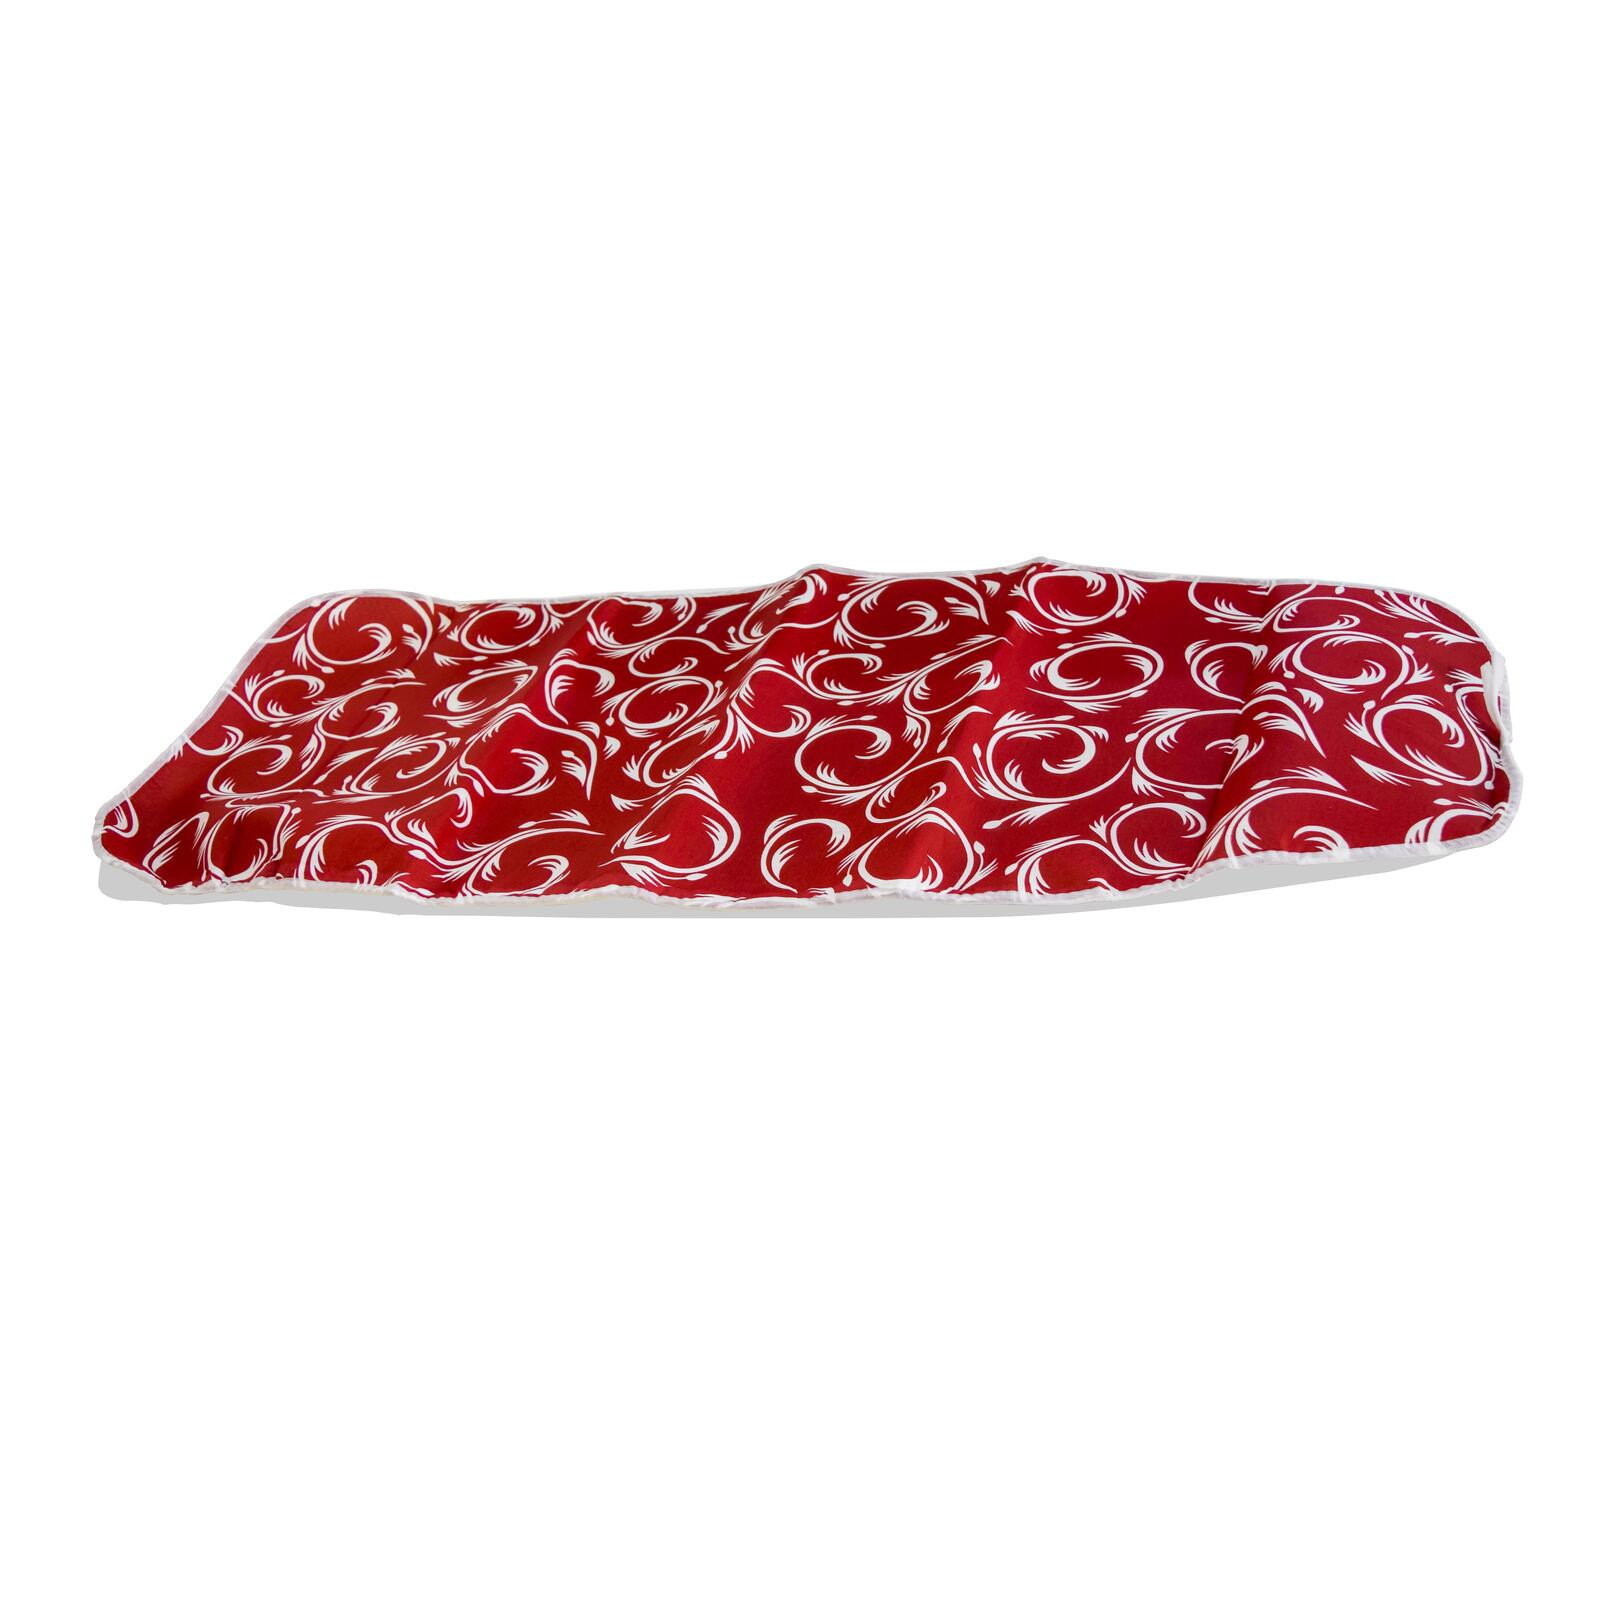 AKC | Ironing Board Cover